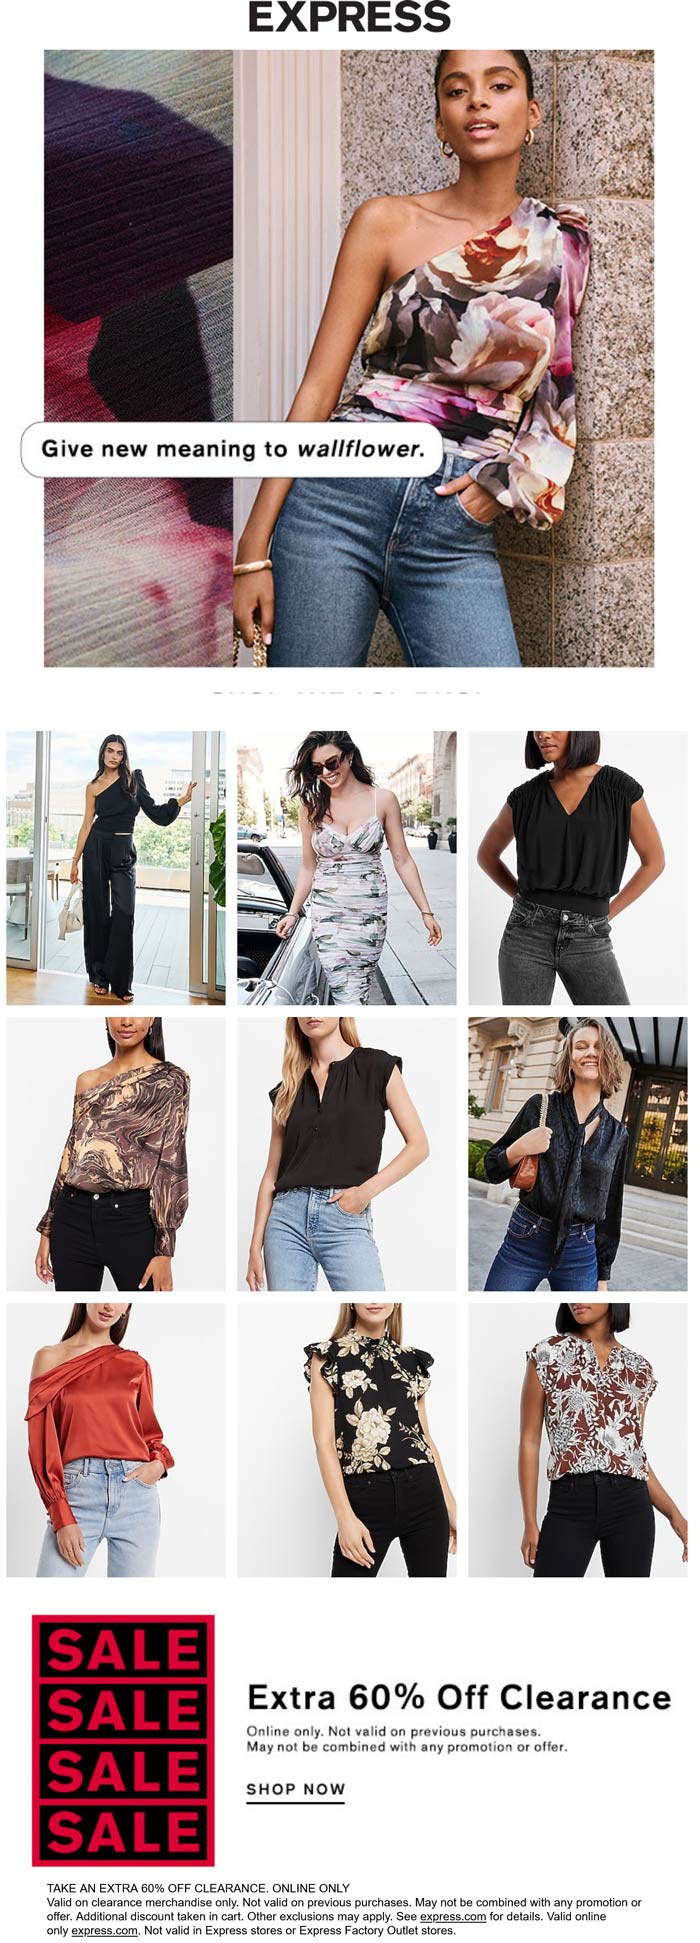 Express stores Coupon  Extra 60% off clearance online at Express #express 